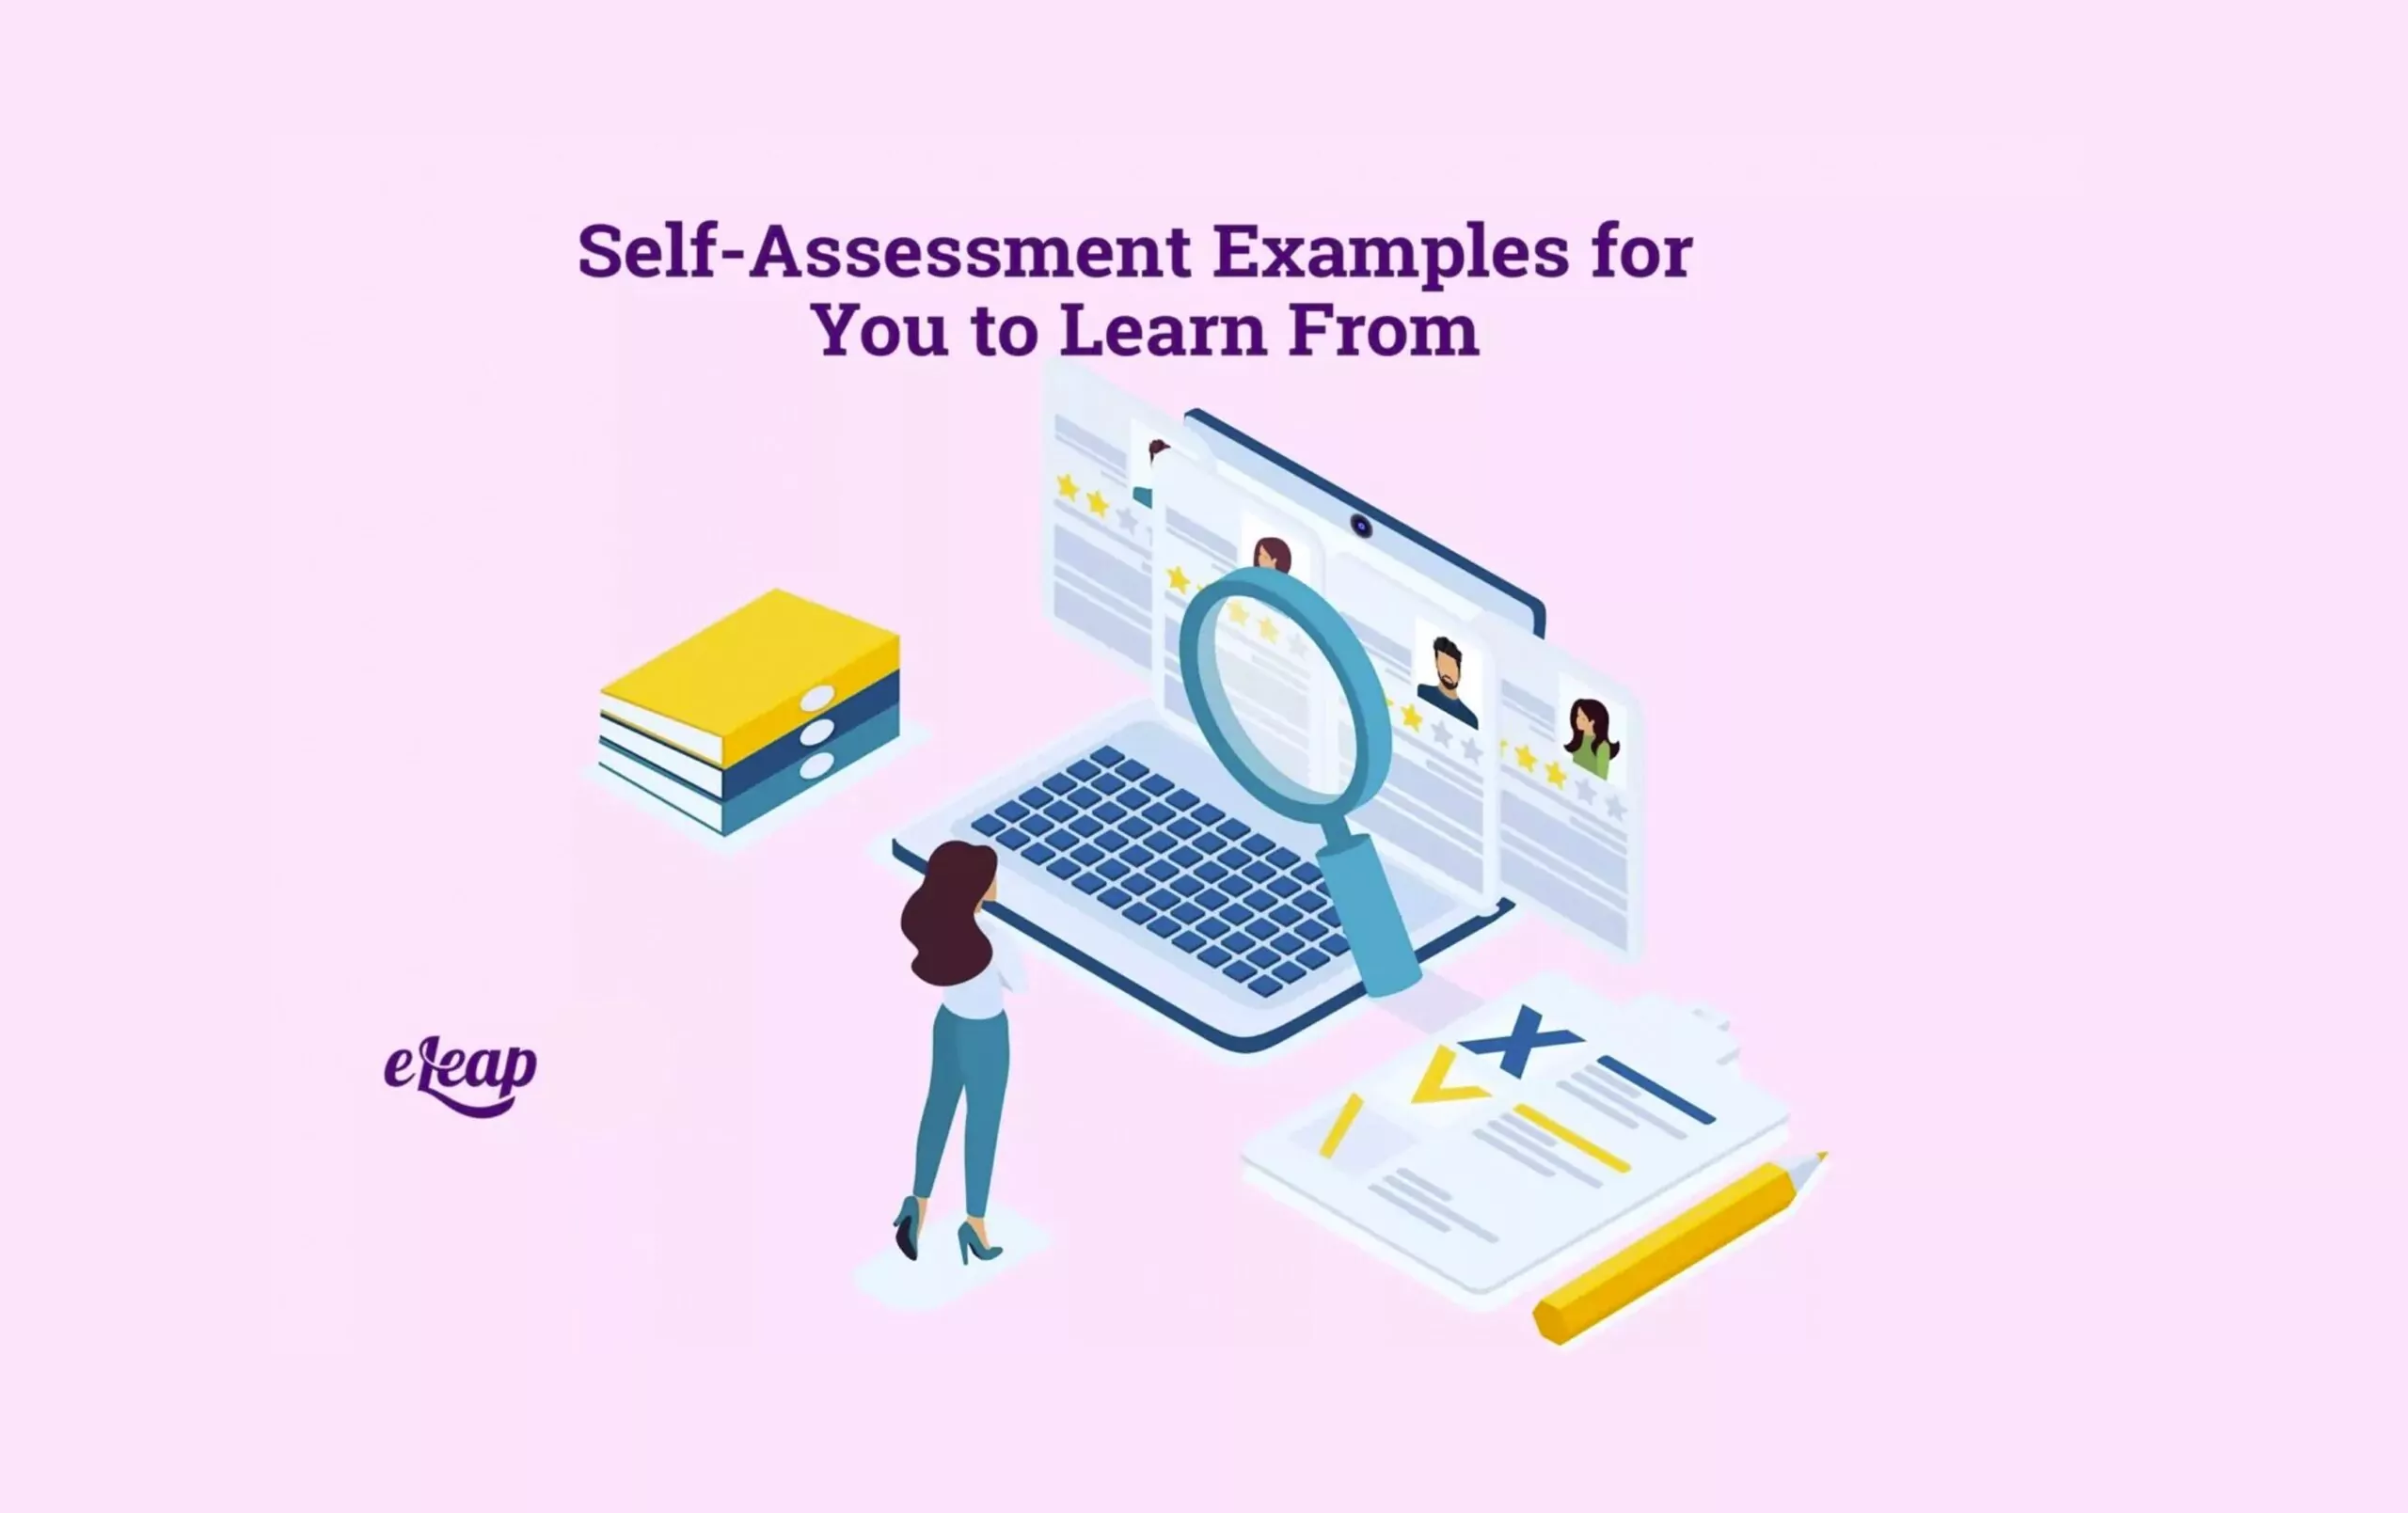 Self-Assessment Examples